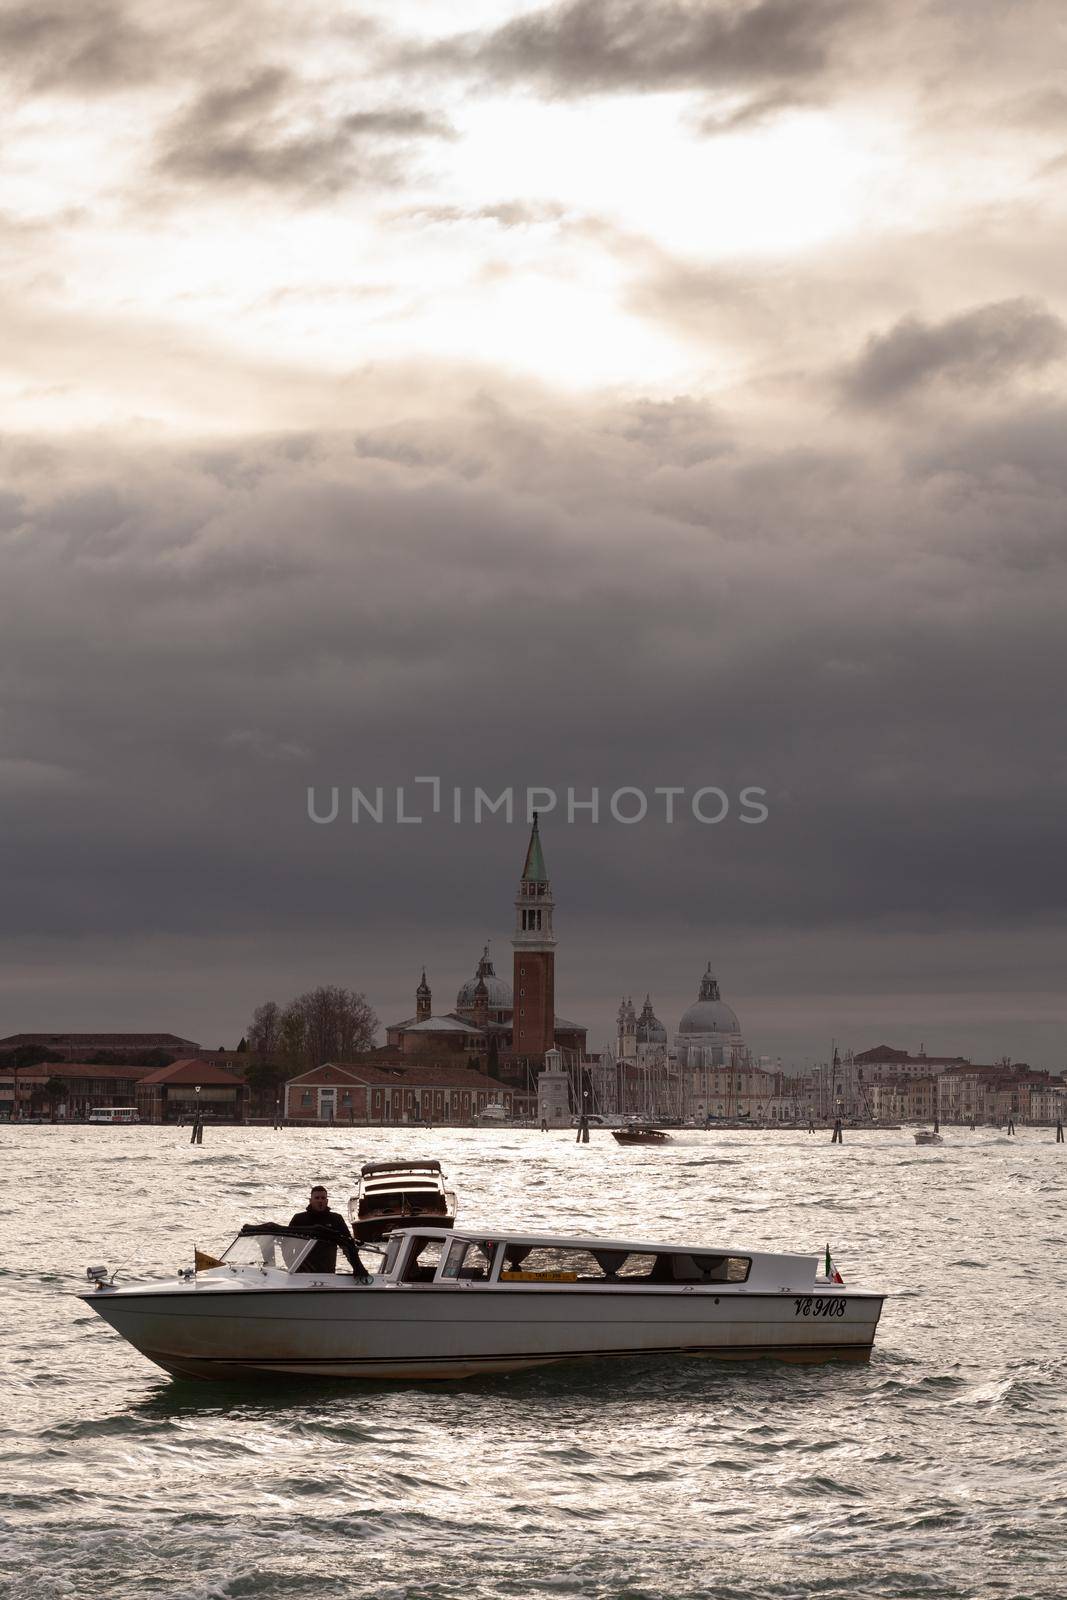 View of the St. Giorgio church on the cloudy sky by bepsimage